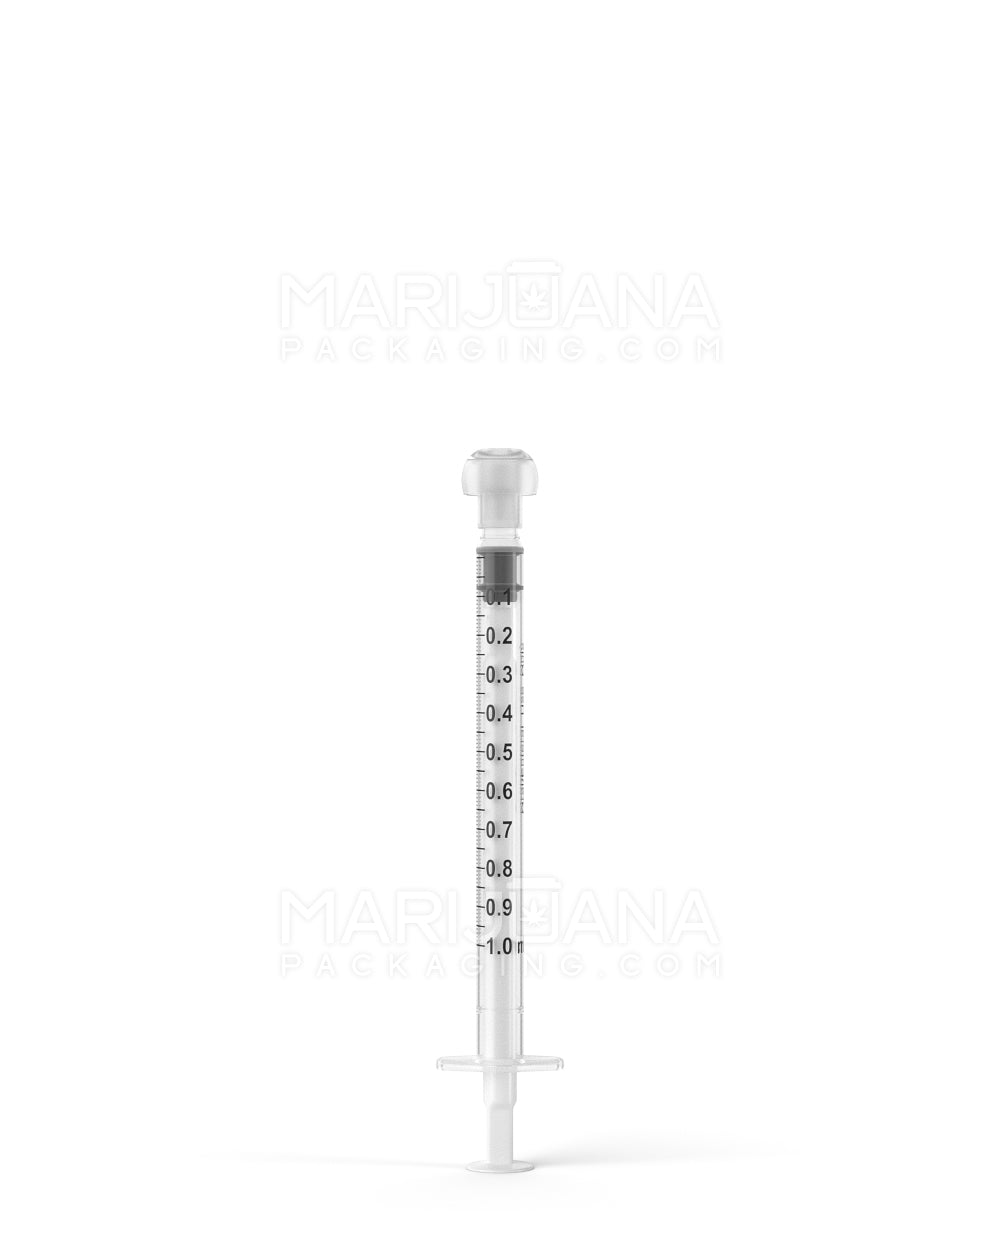 Plastic Oral Concentrate Syringes | 1mL - 0.1mL Increments - 100 Count - 8